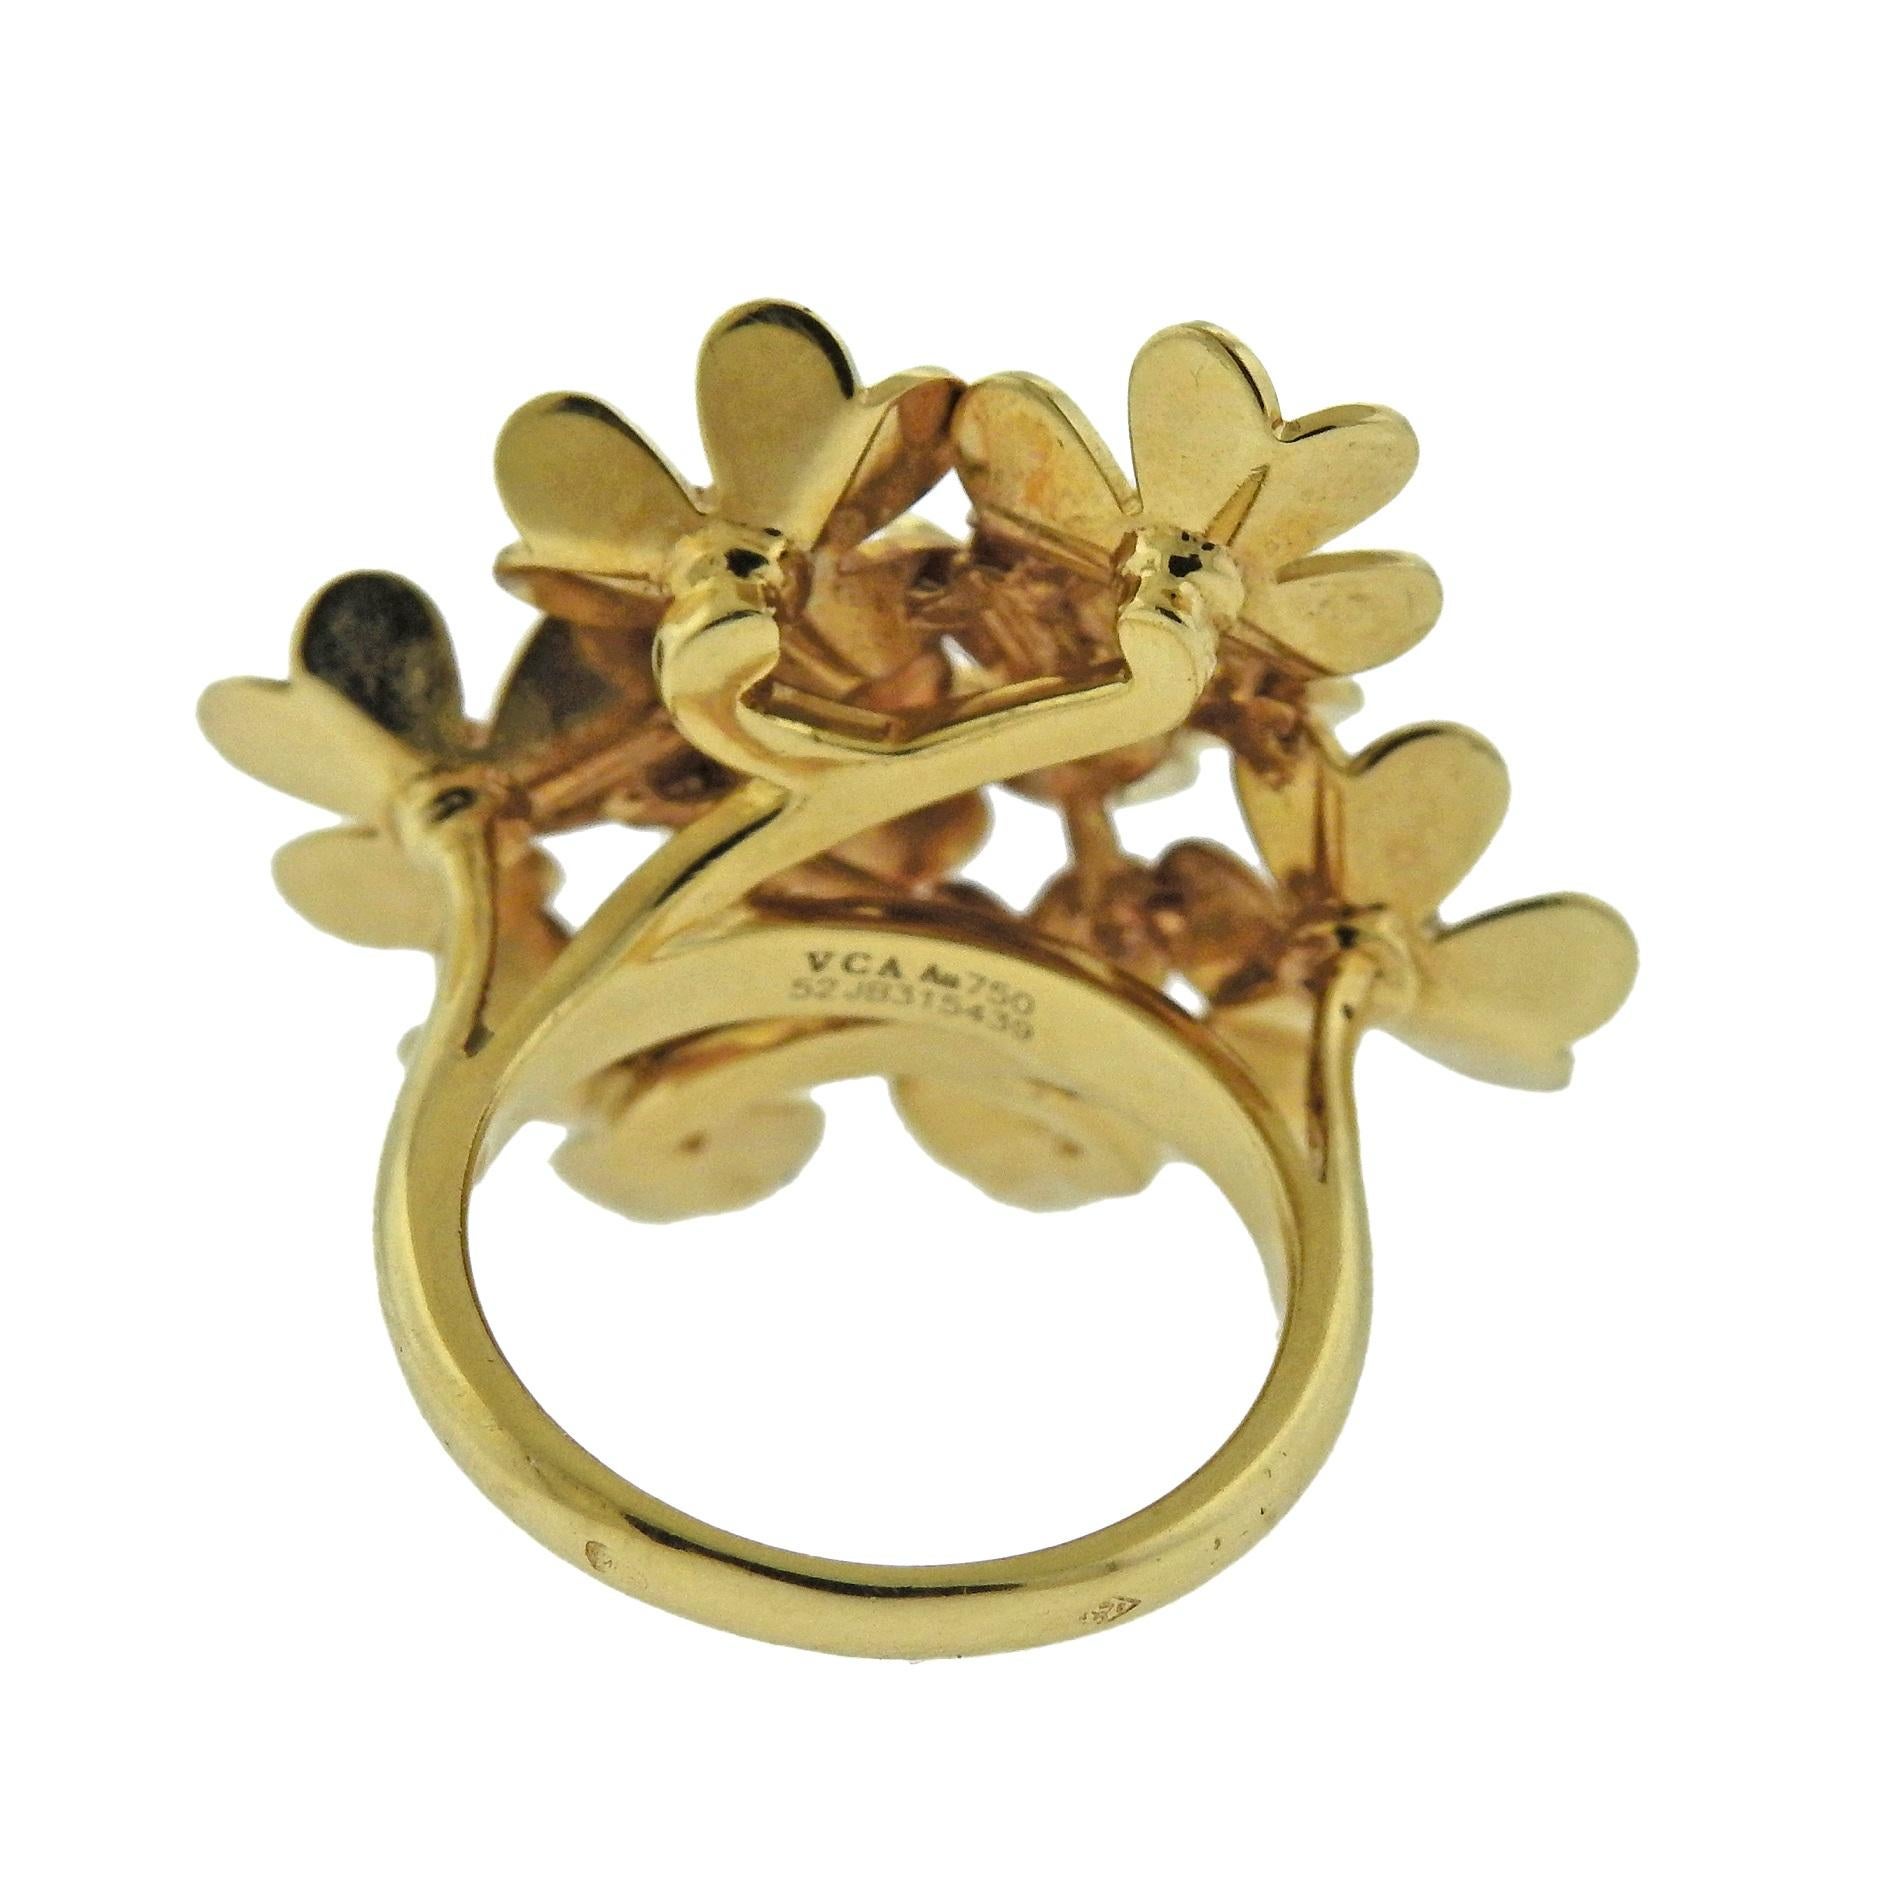 18k yellow gold Frivole ring, crafted by Van Cleef & Arpels, featuring flower motifs, each set with a diamond (total approx. 0.43ctw VVS/FG). Retail $9250. Comes with box. Ring size - 6.25, ring top is 32mm x 27mm, weighs 11.4 grams. Marked: VCA,